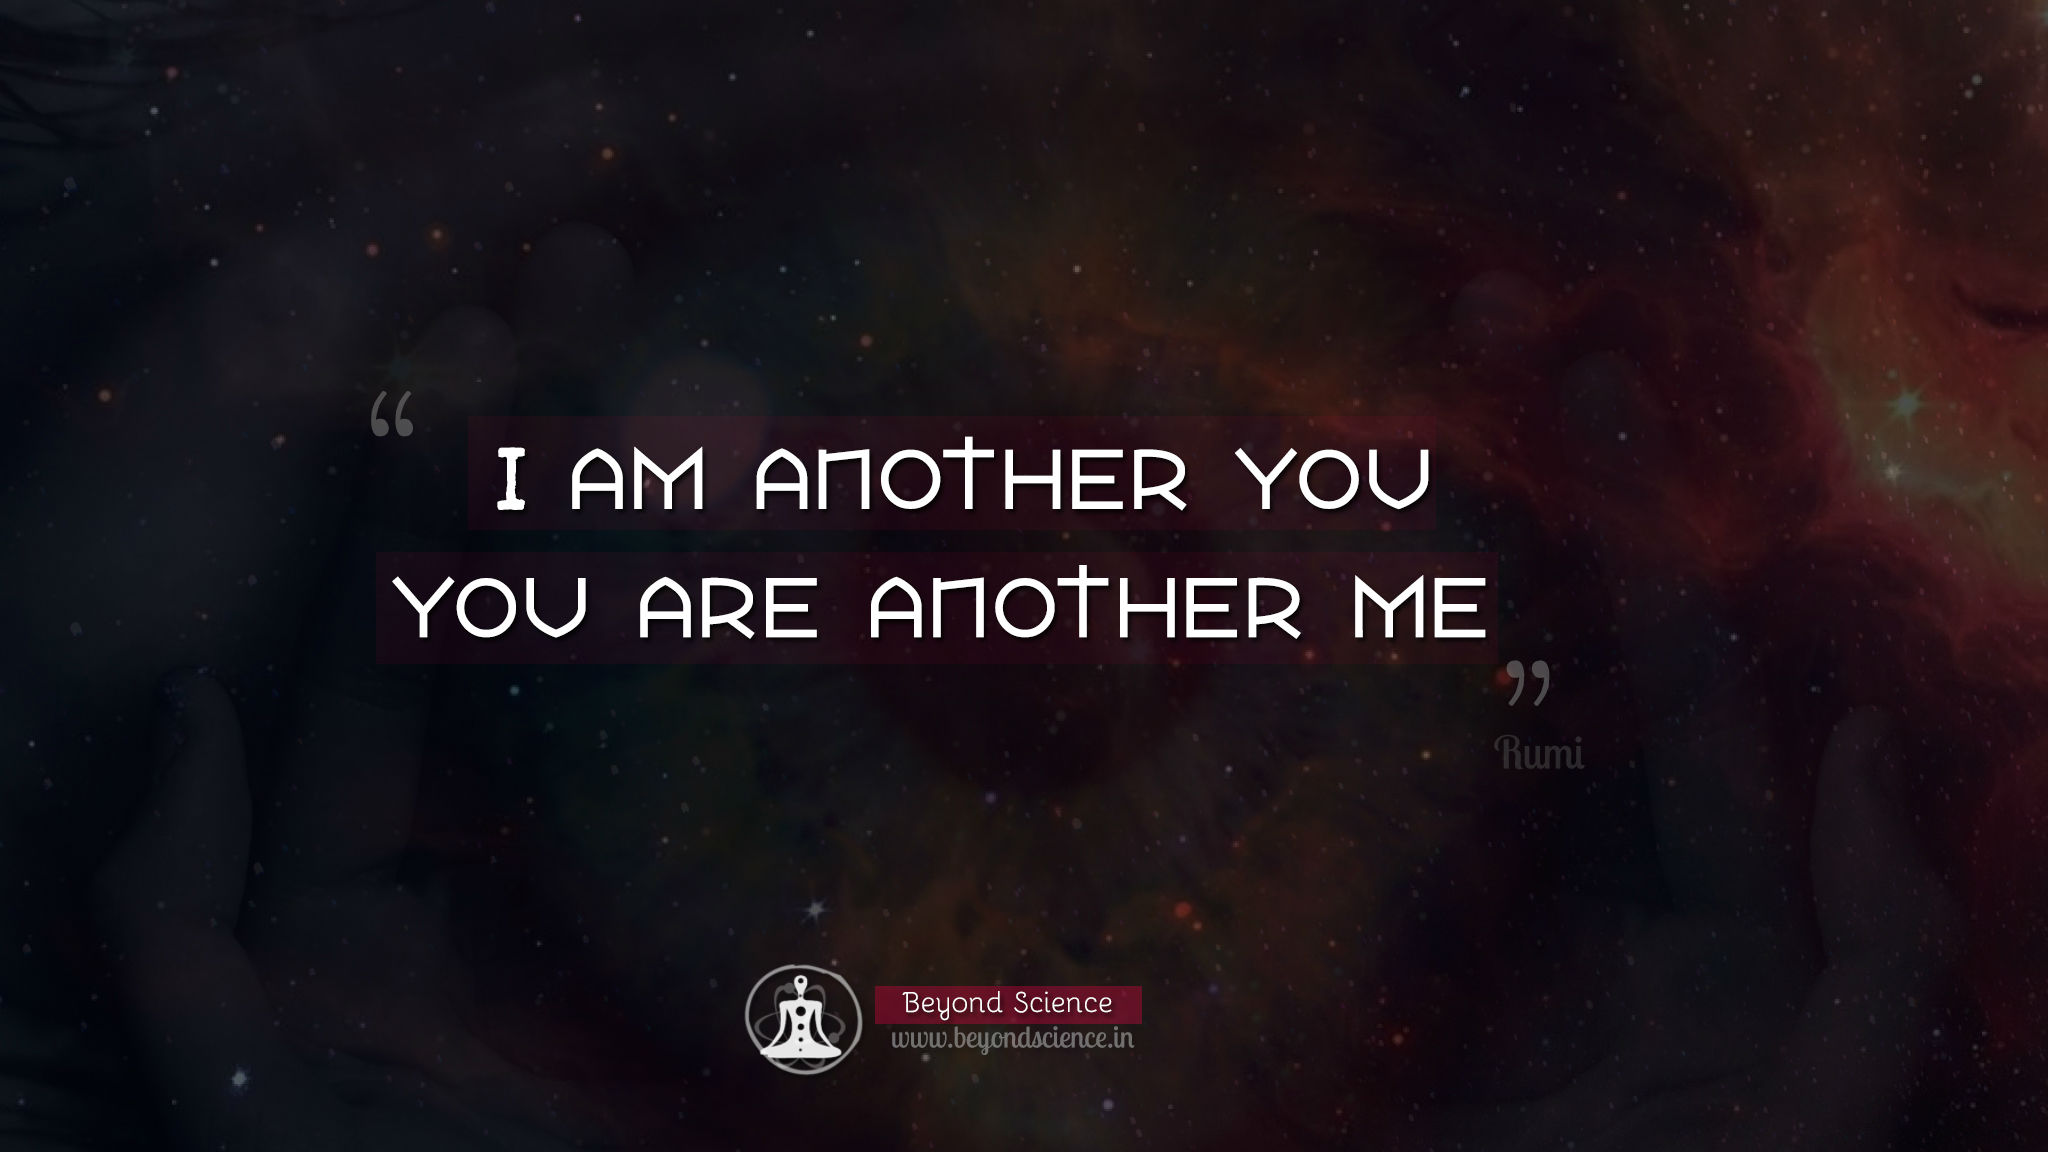 I am another you. You are another me